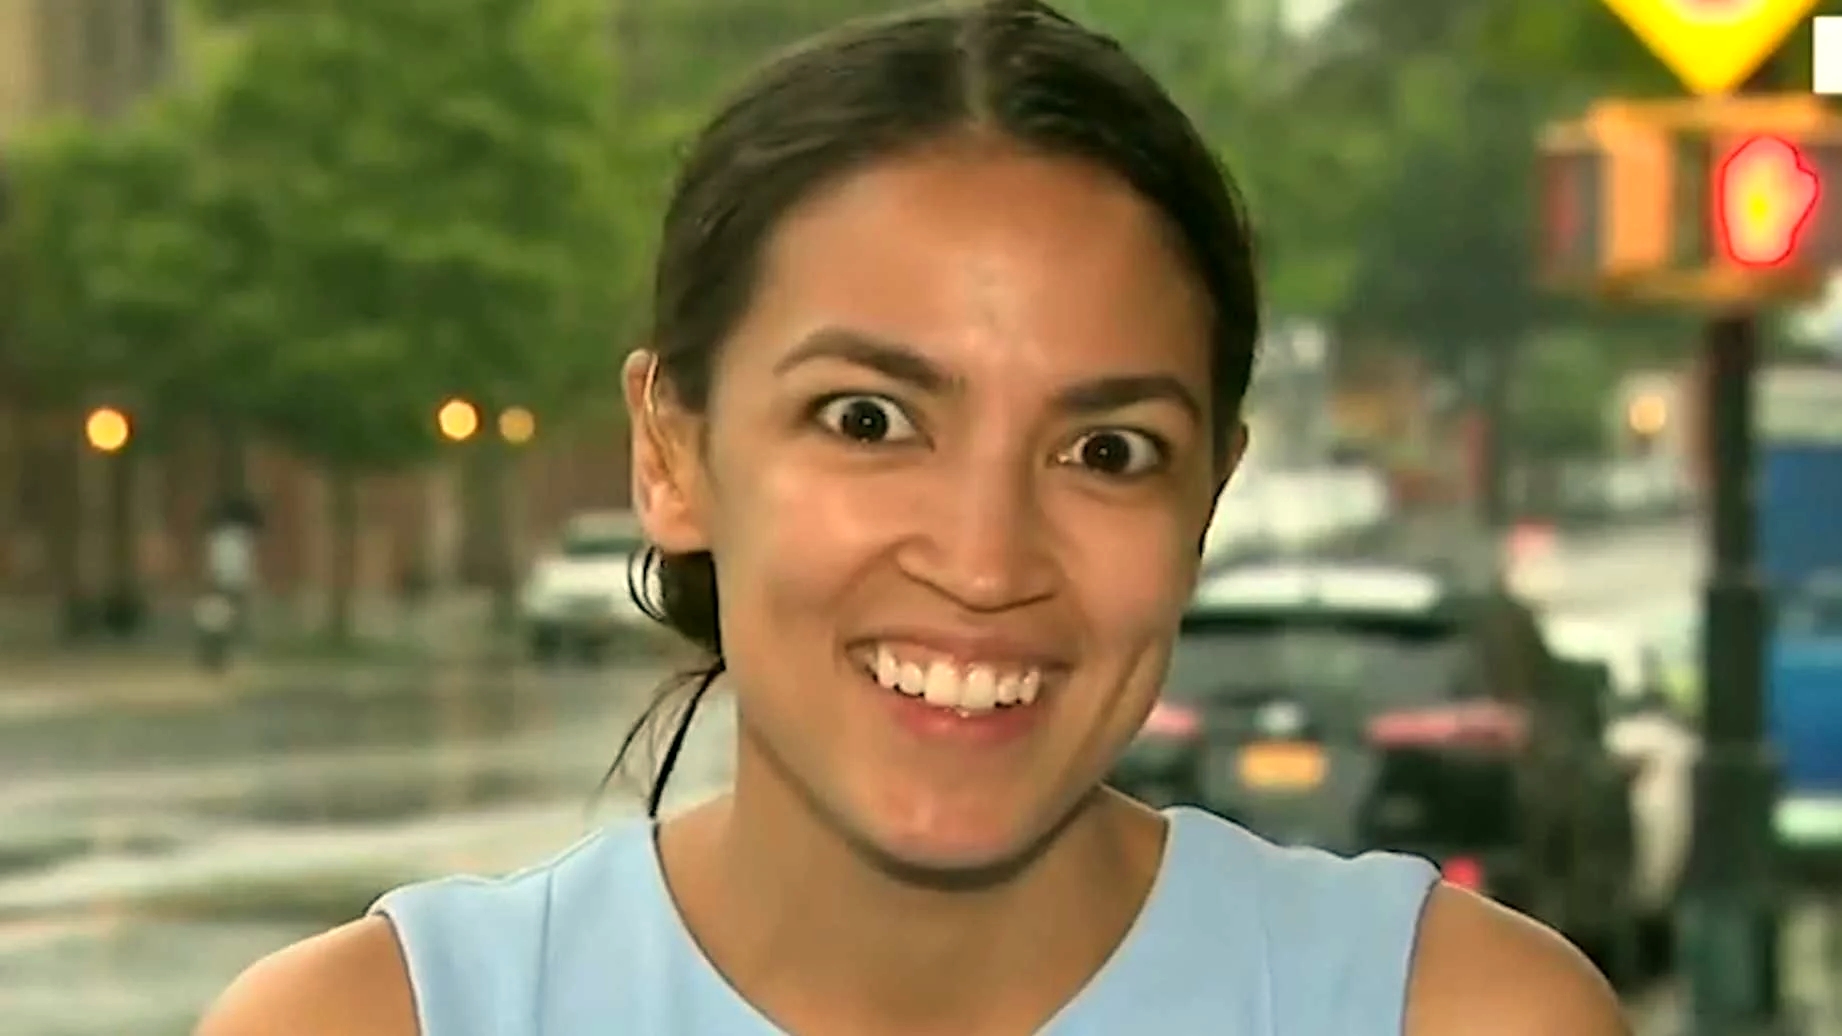 They Re Trying To Downplay Ocasio Cortez Win This Week — But We Know Better Mentalunrest